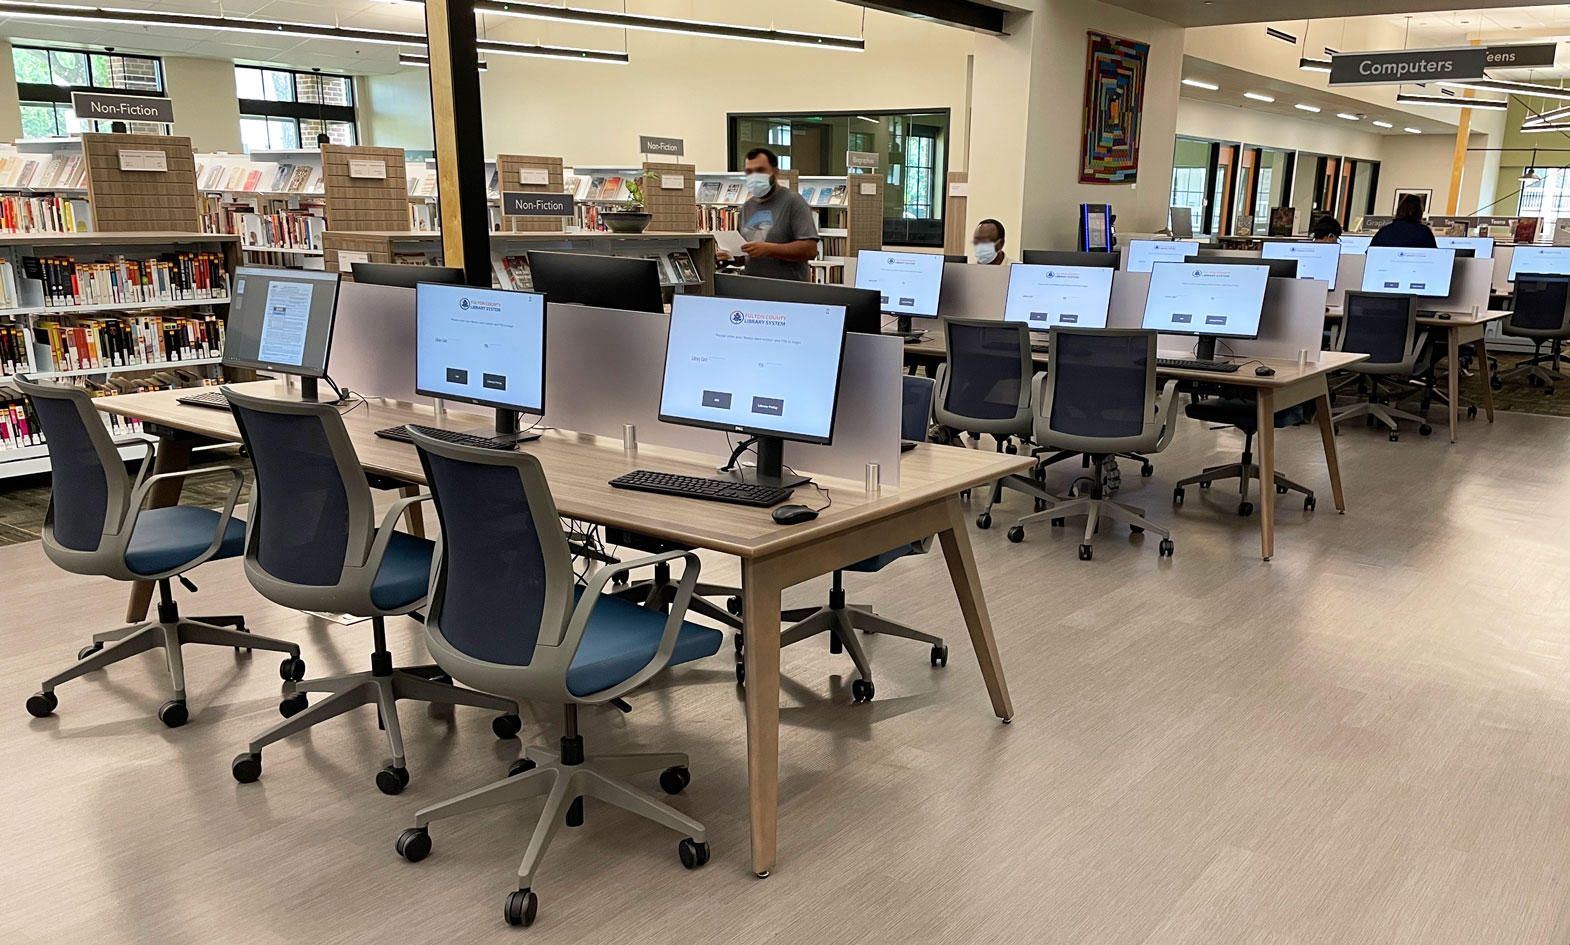 wood computer tables with integrated power, cable management and frosted center divider in public library